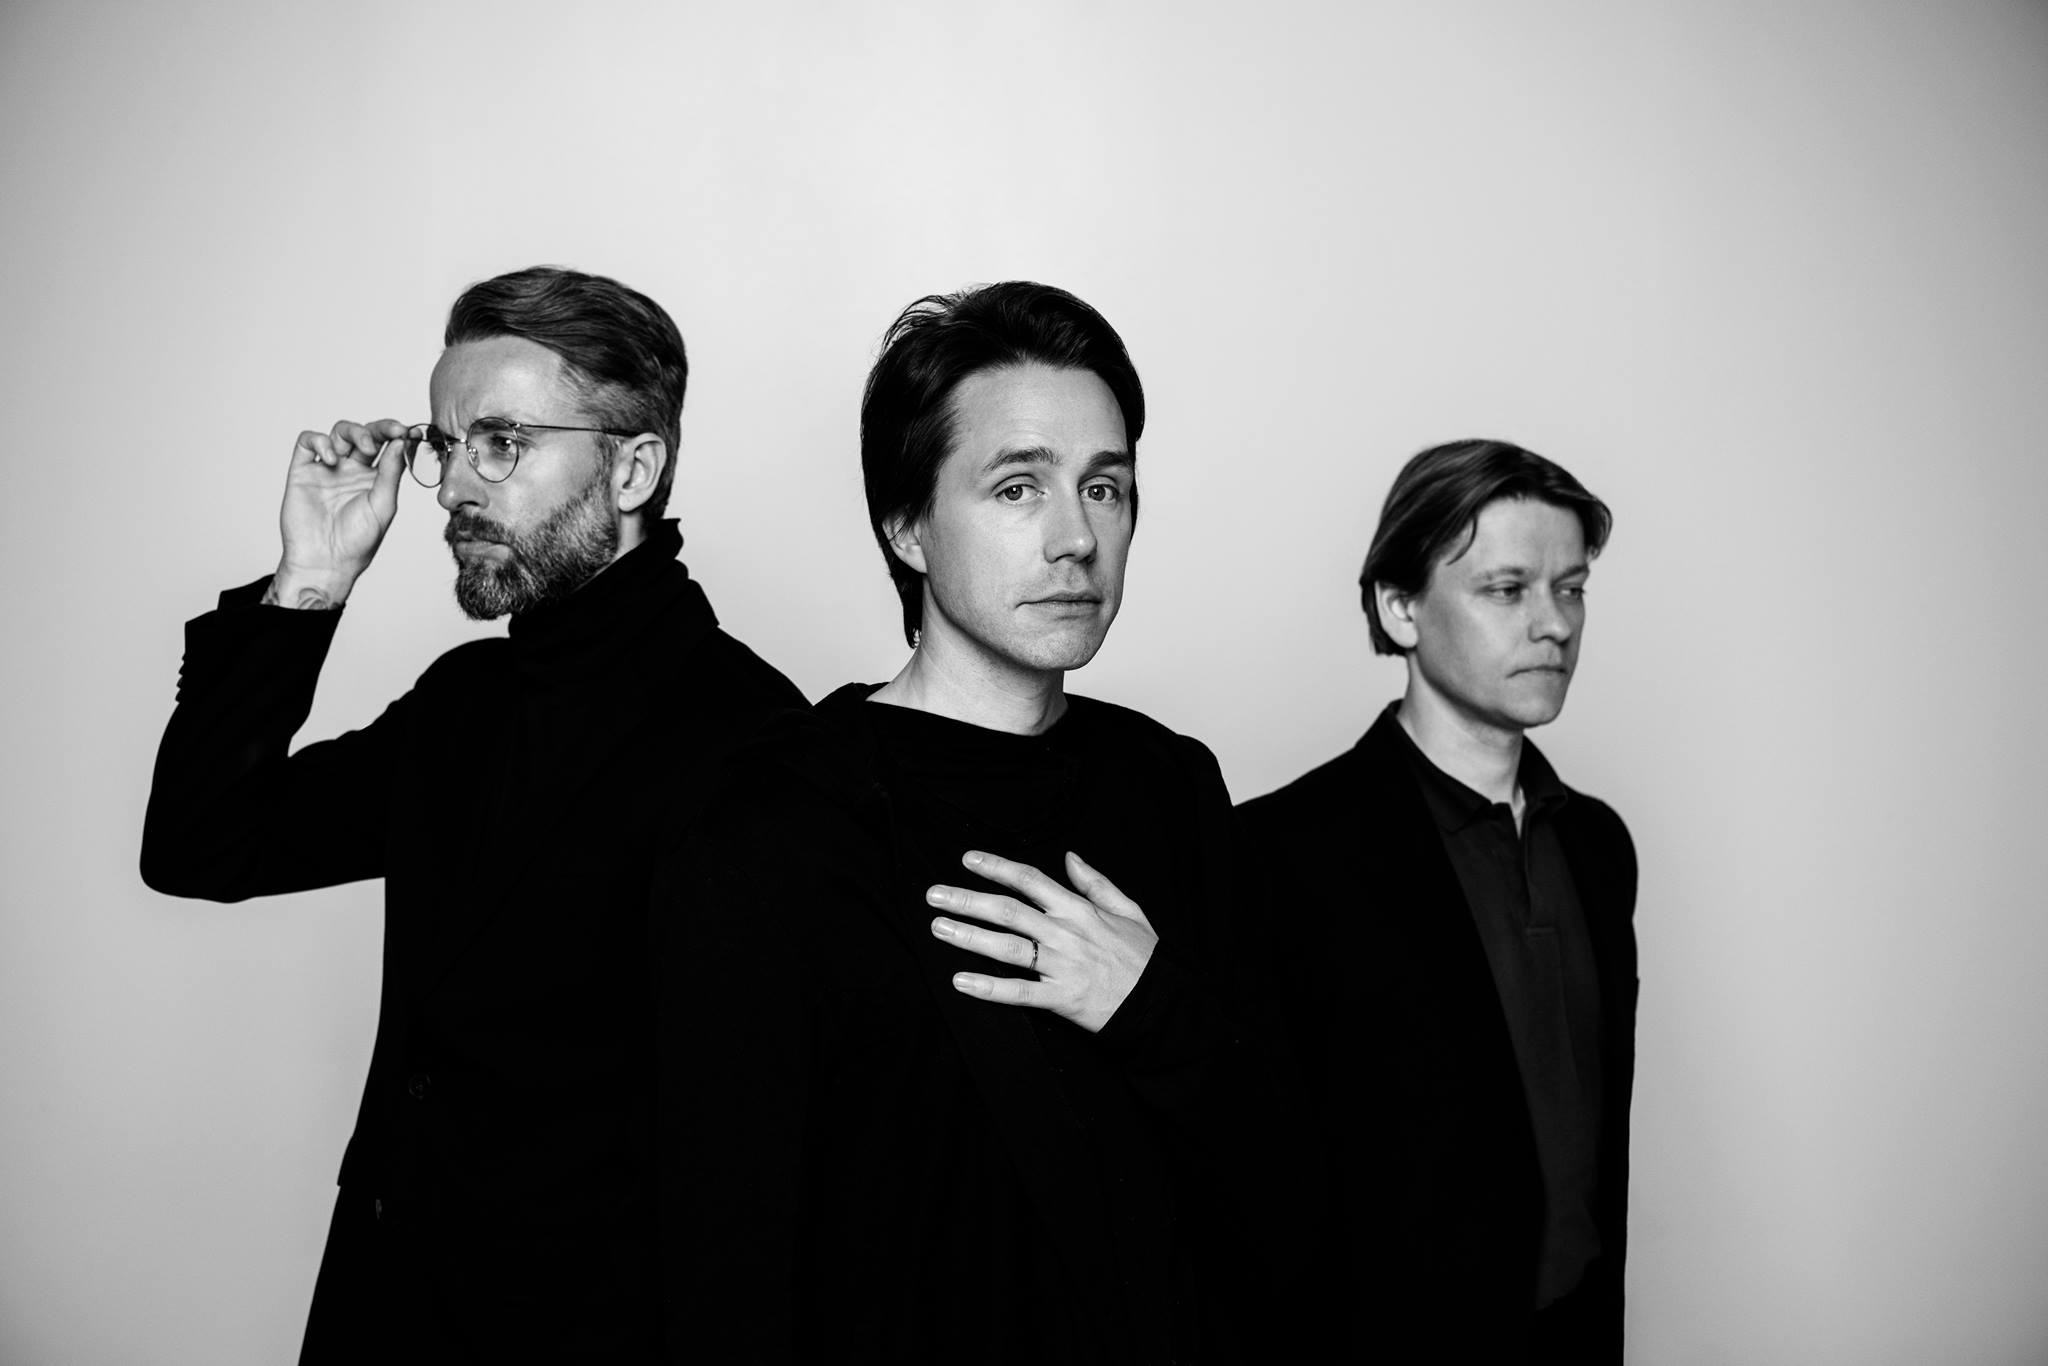 LIVE REVIEW: Mew at Royal Festival Hall, London 